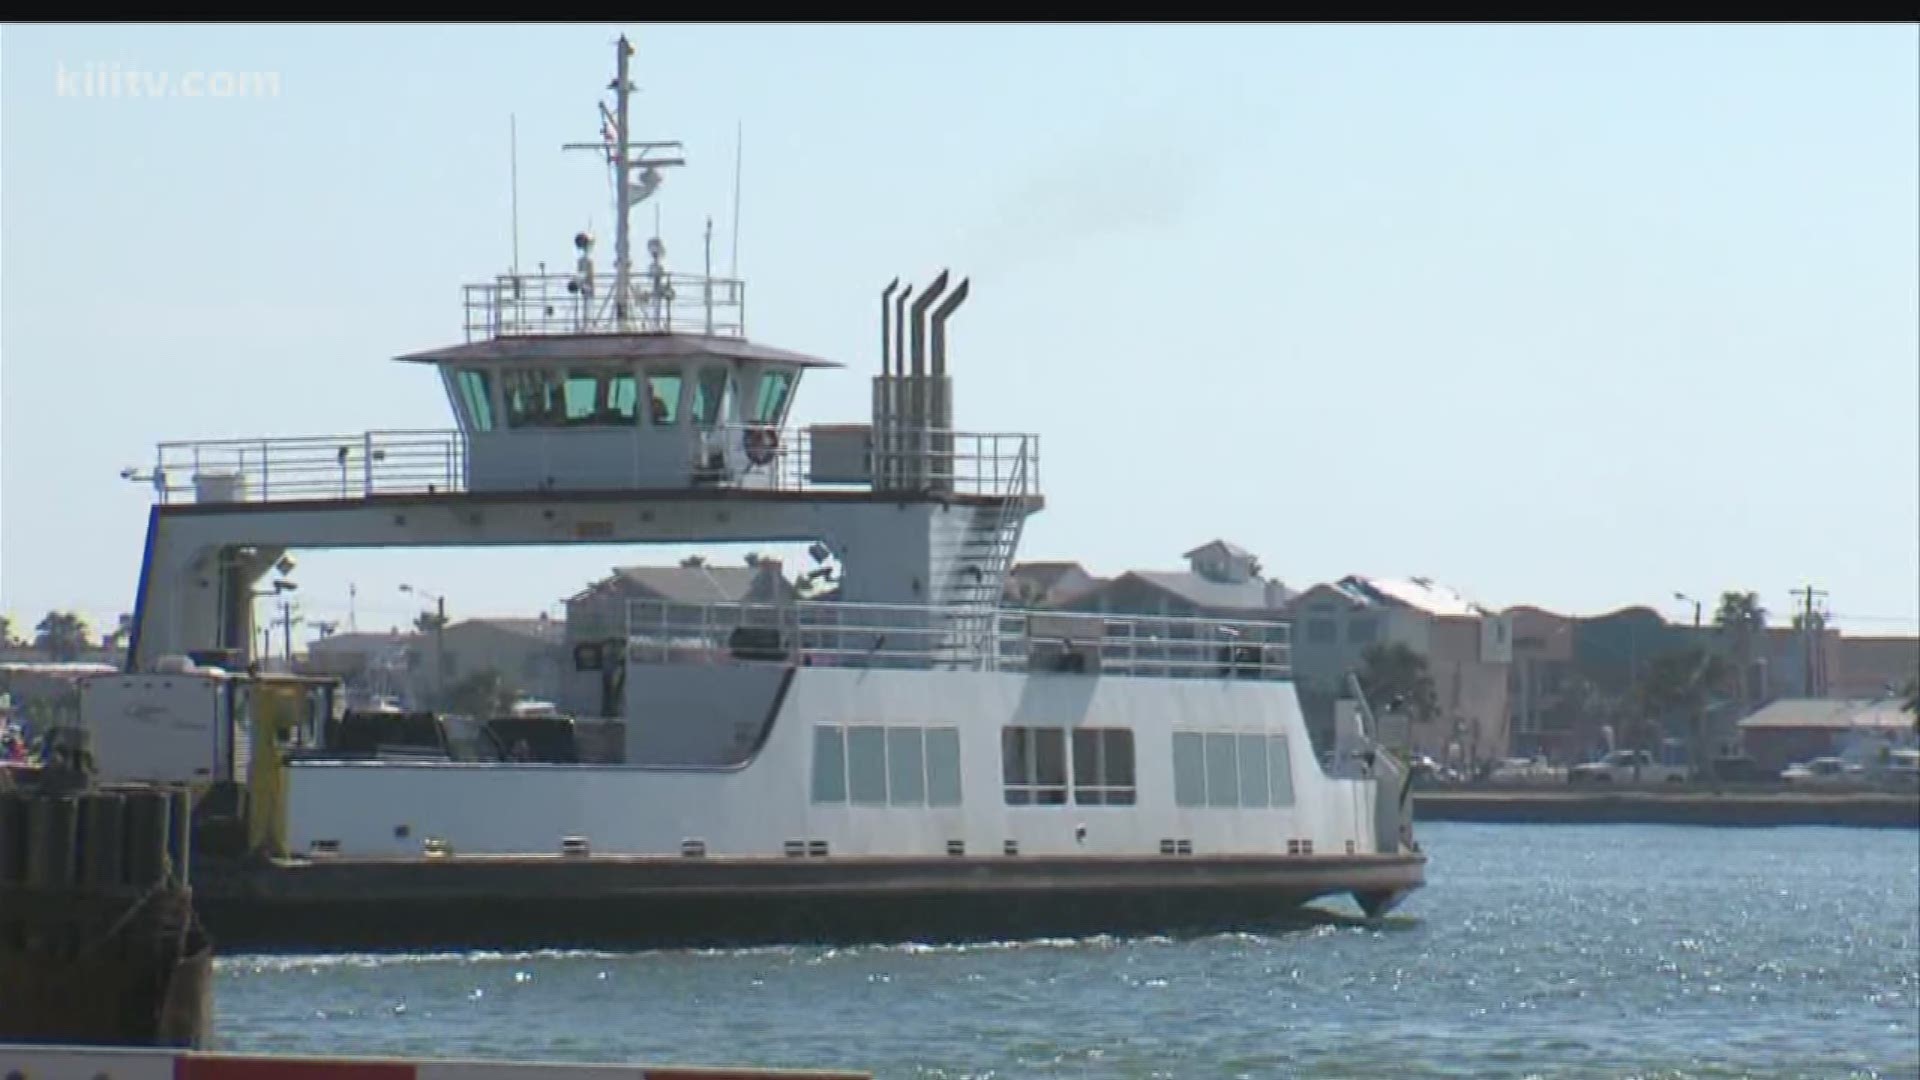 One person sent to hospital after Port Aransas ferry crashes into a dock